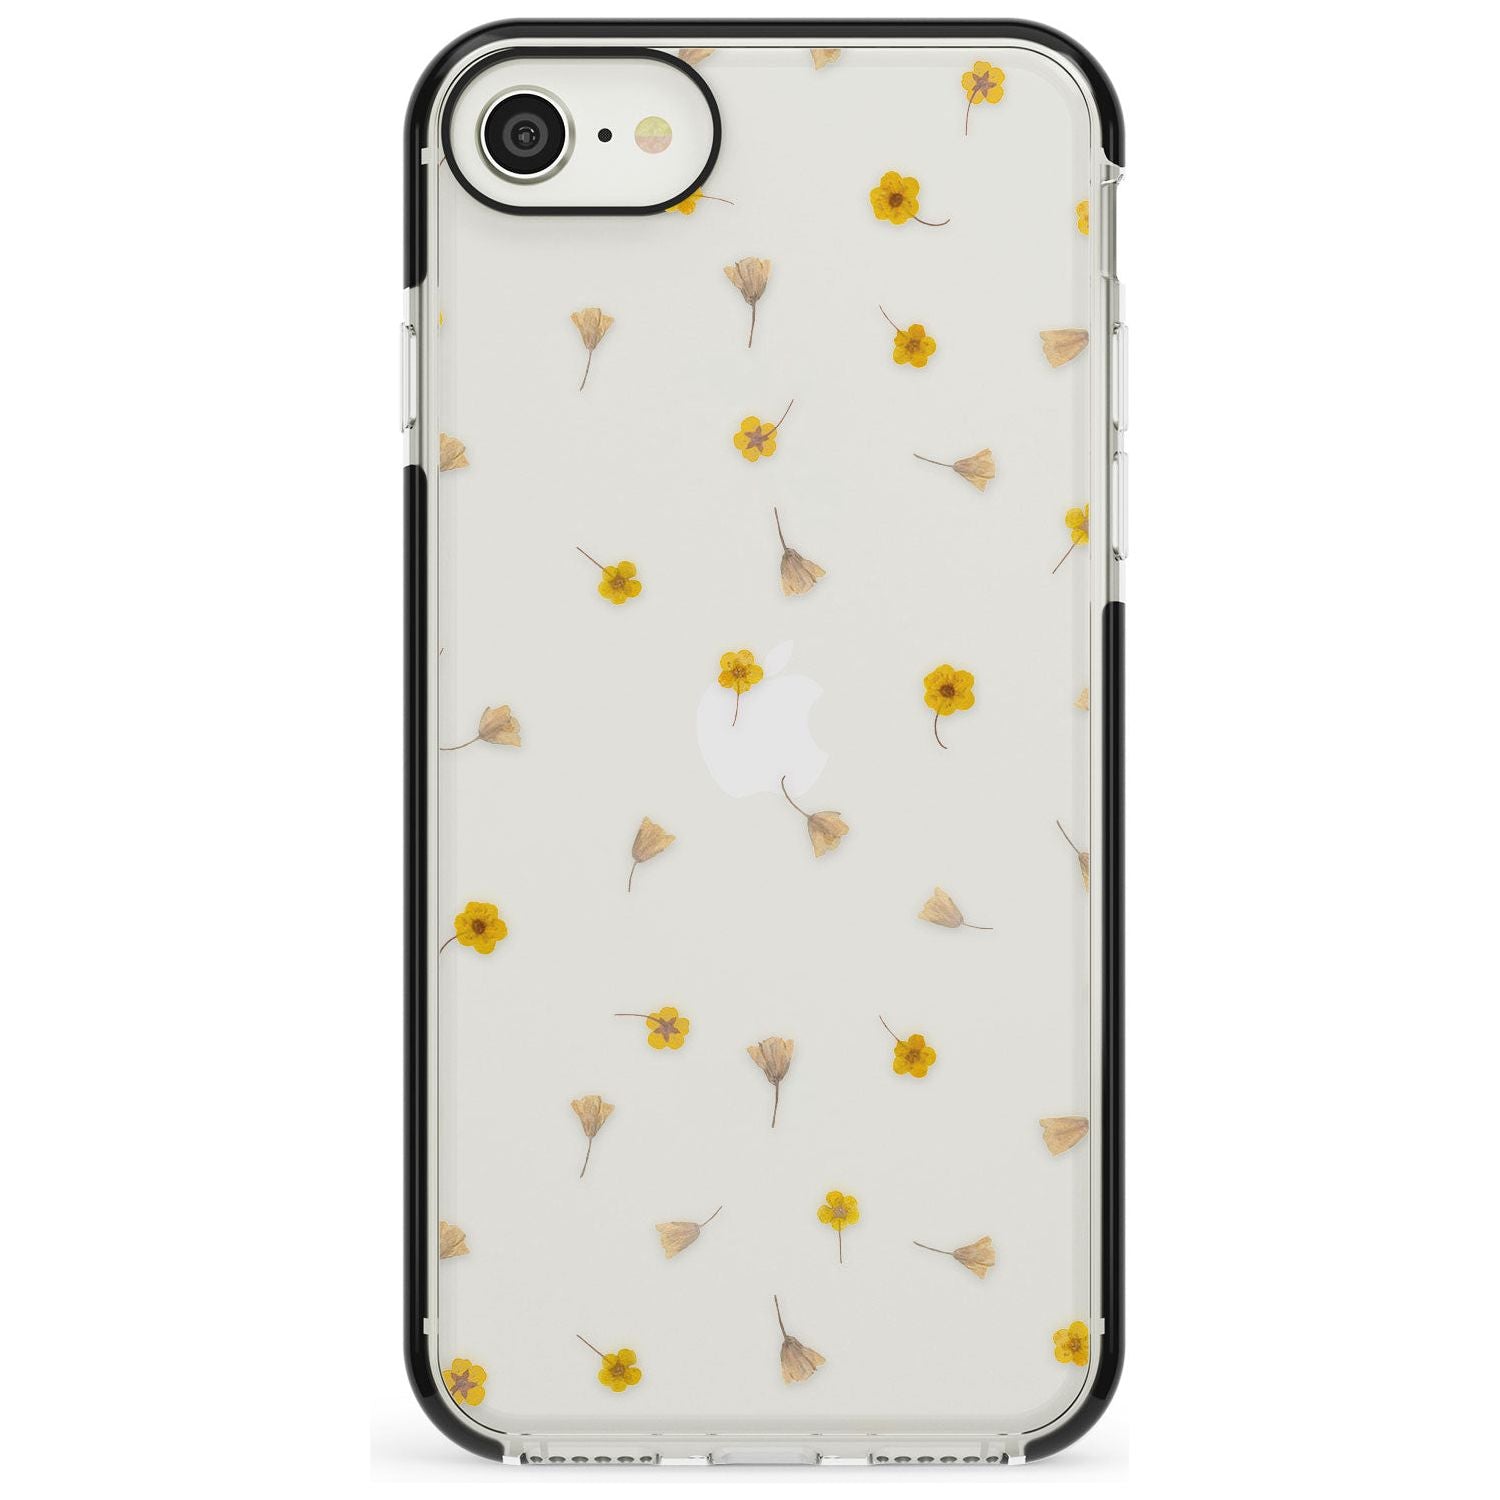 Small Flower Mix - Dried Flower-Inspired Design Black Impact Phone Case for iPhone SE 8 7 Plus